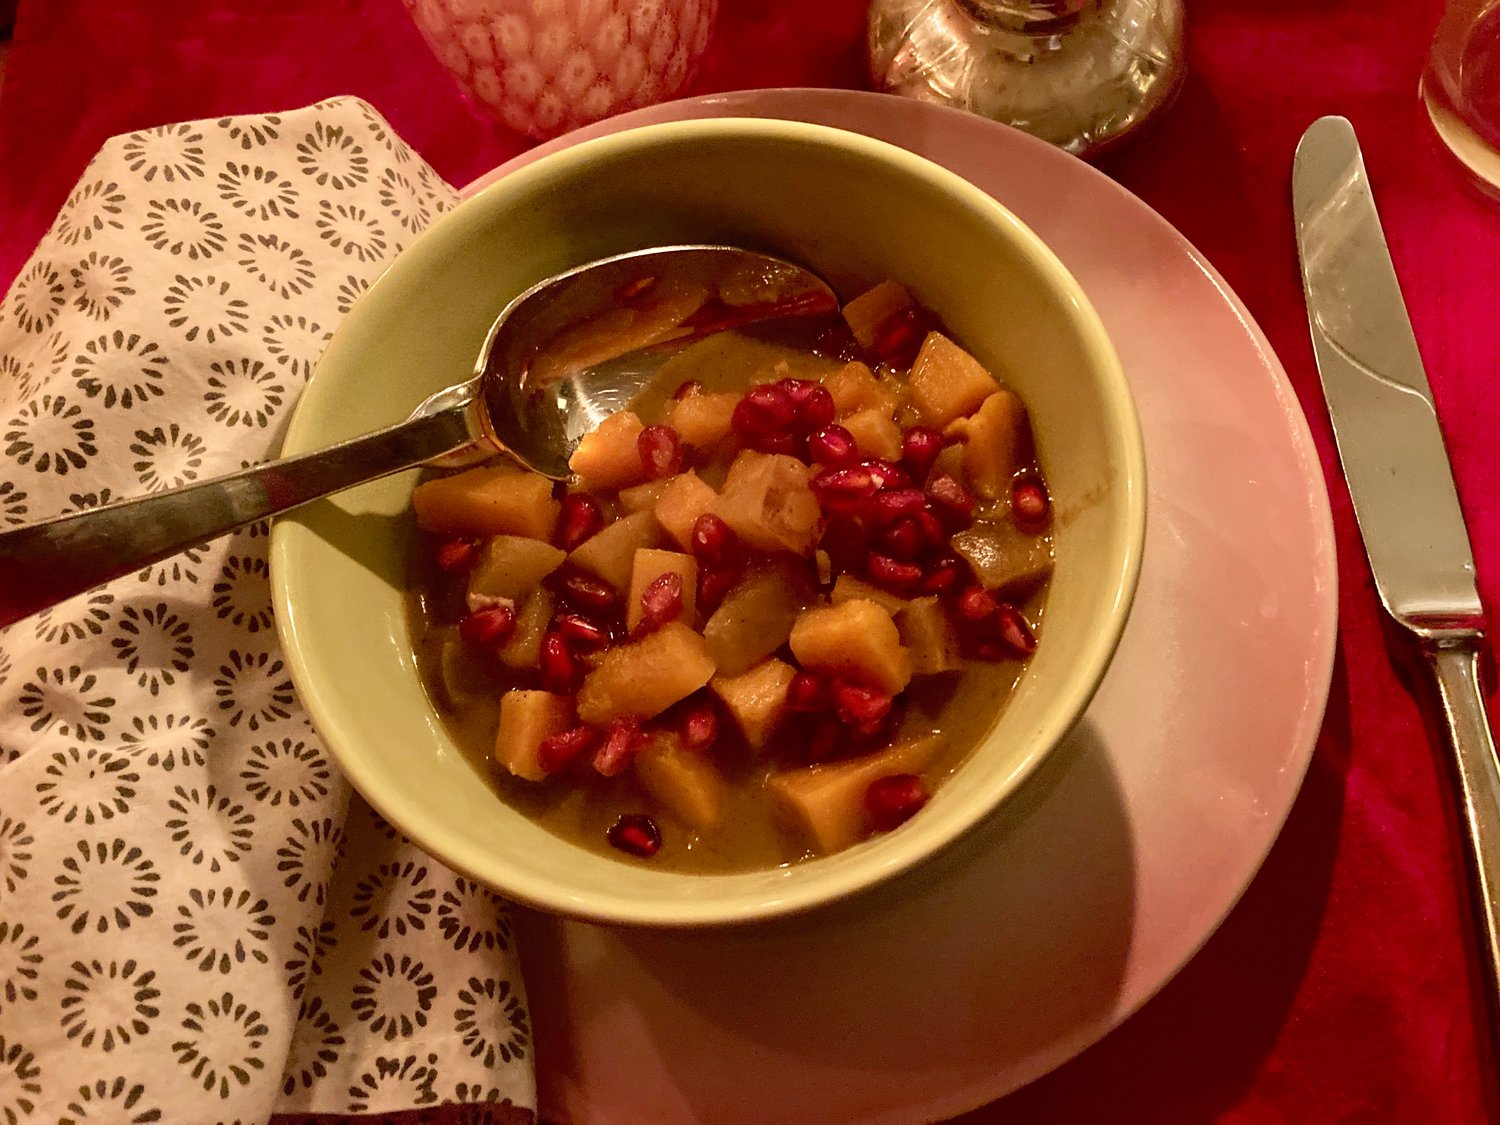 Coconut-curry Harvest Soup is a sweet and seasonally festive way to eat well during the holidays.